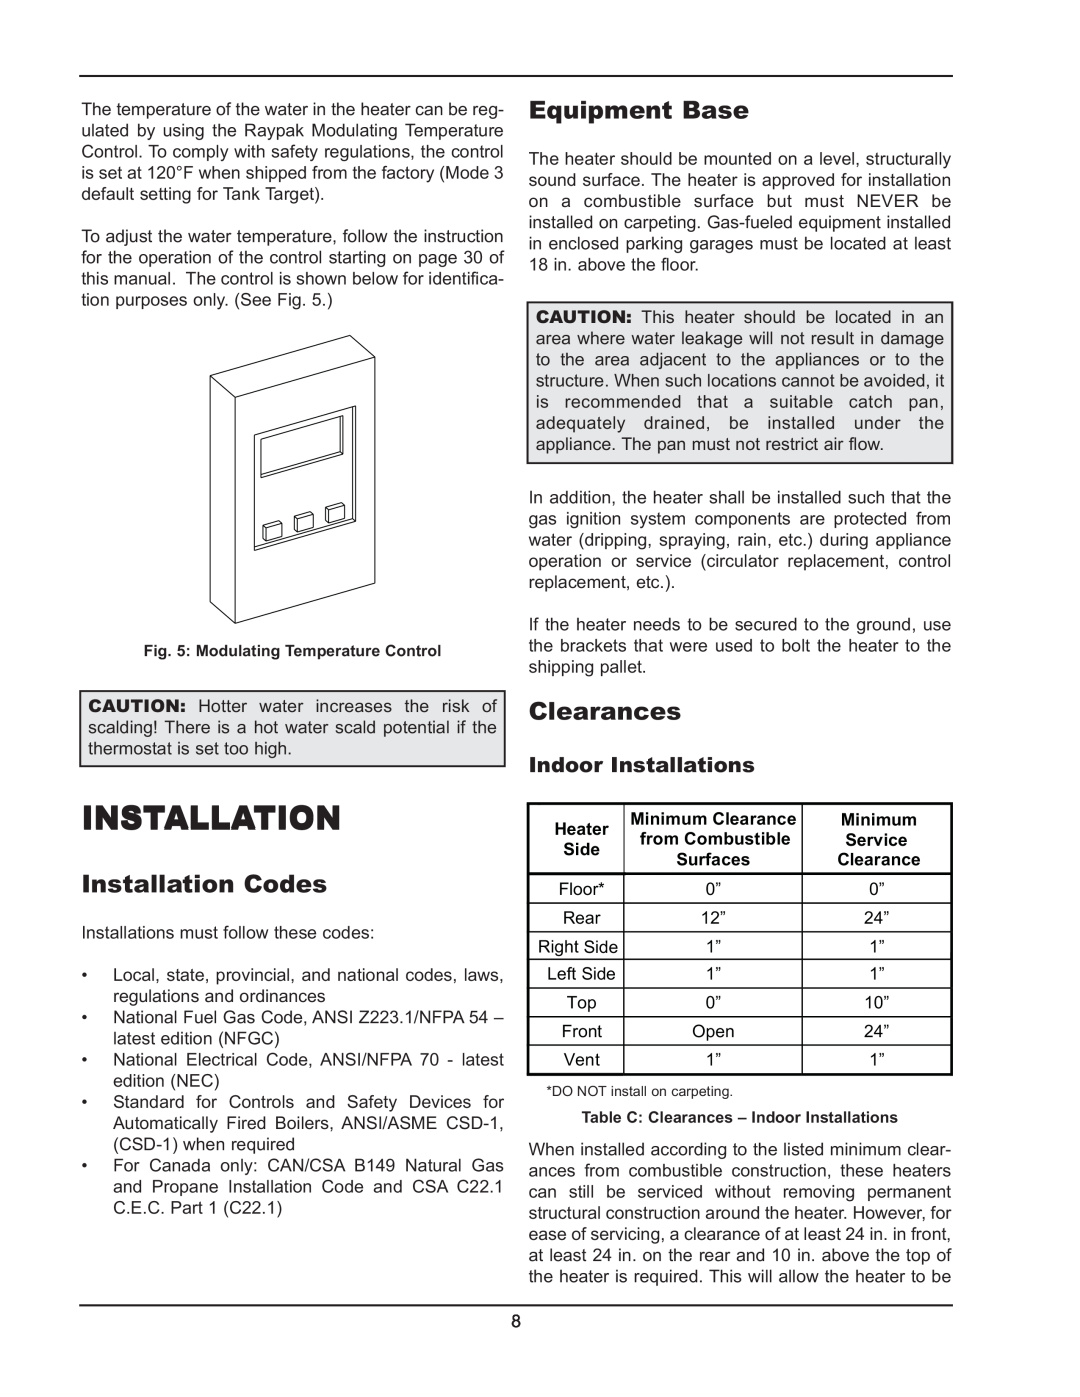 Raypak 5042004 Installation Codes, Equipment Base, Clearances, Heater, Minimum Clearance, from Combustible, Side 